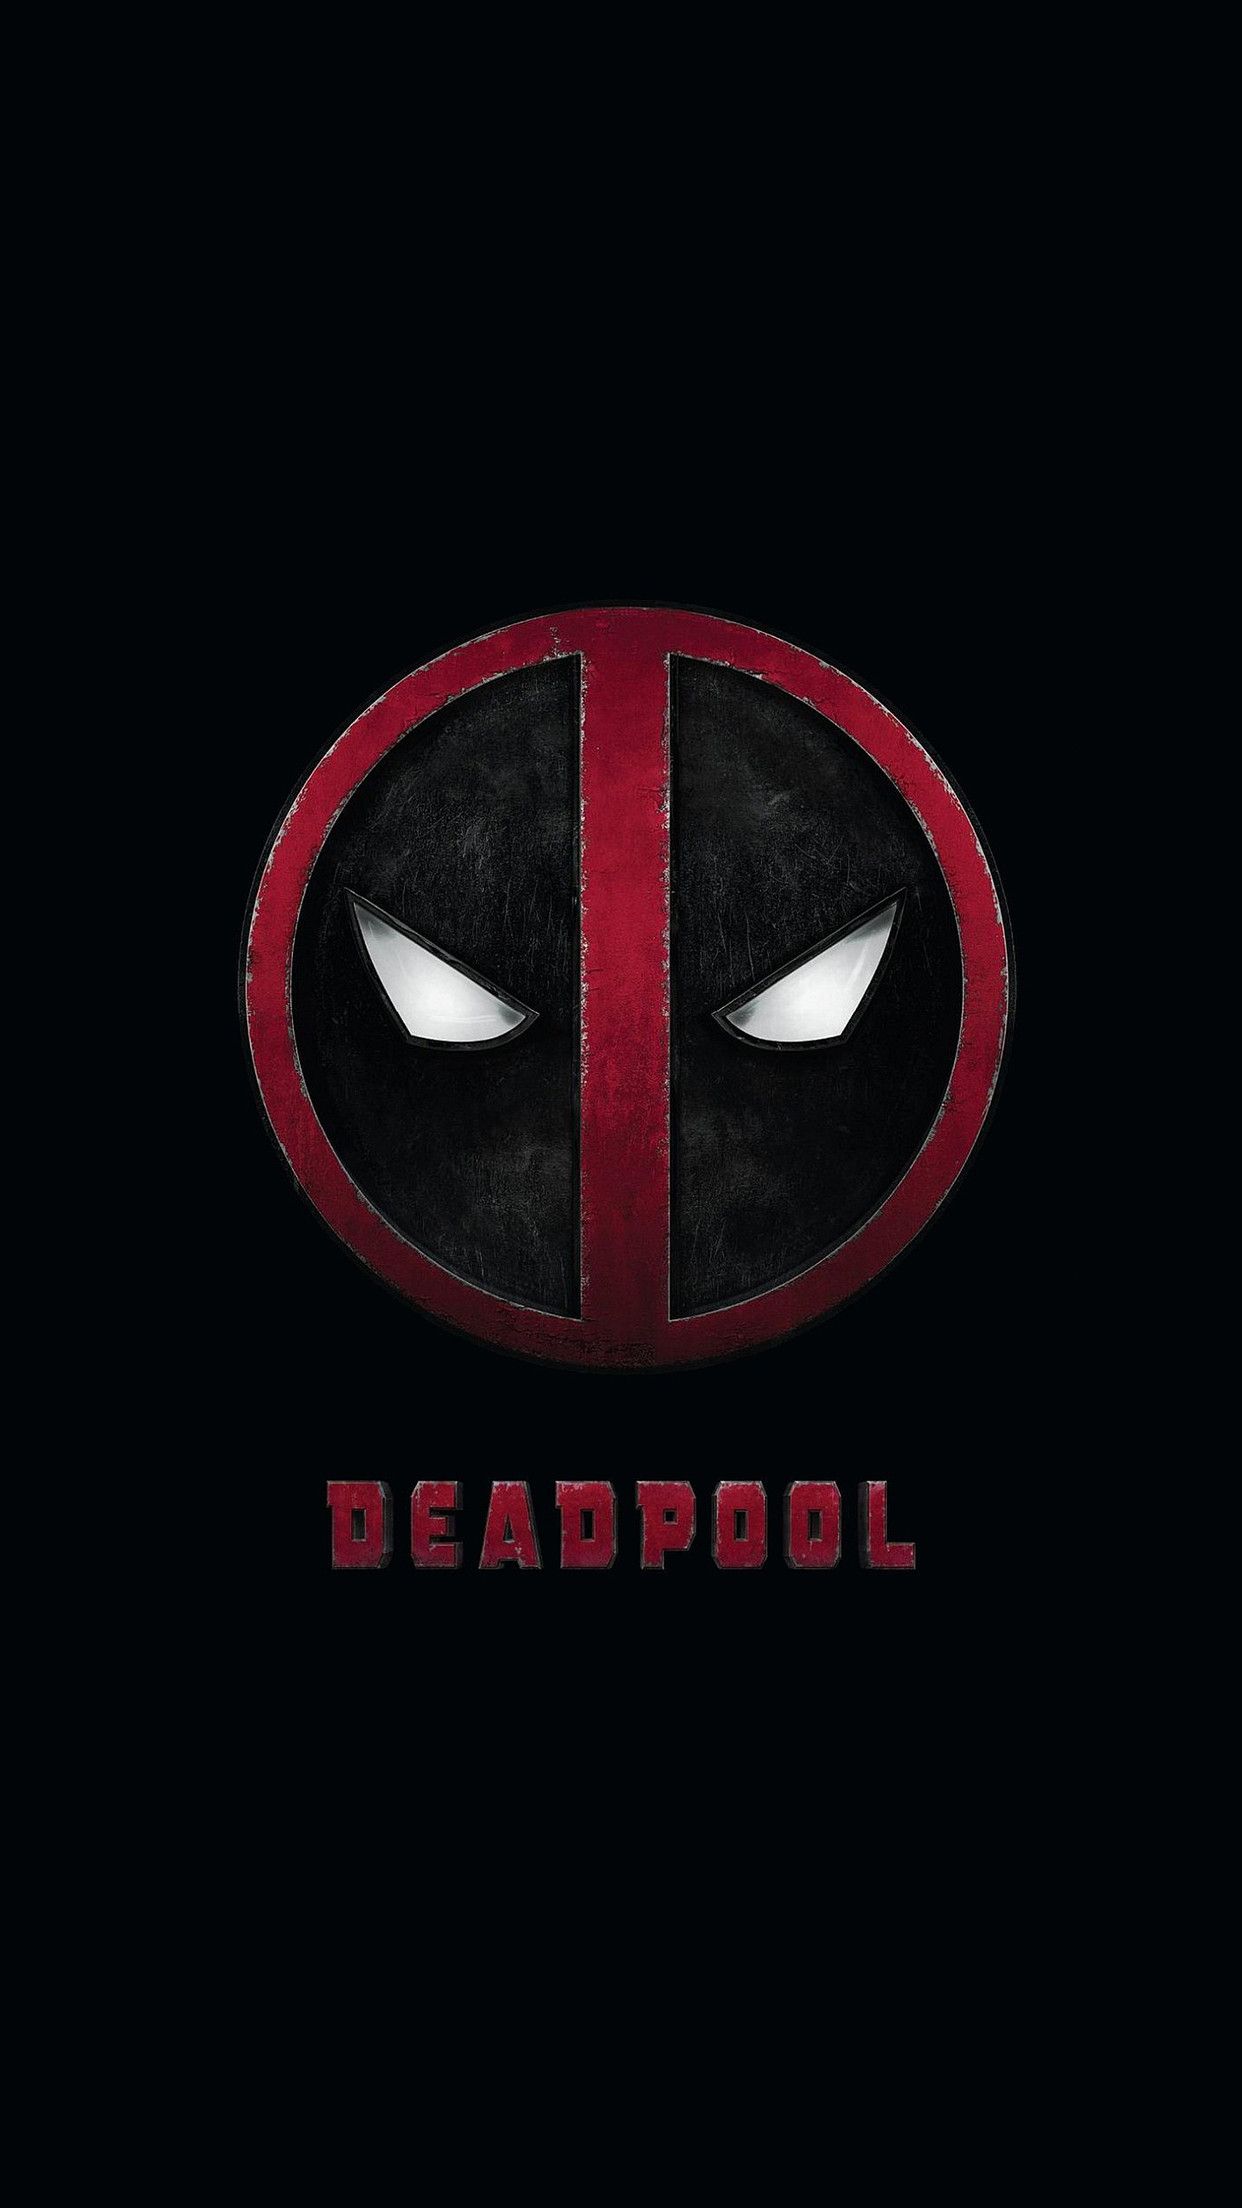 Deadpool HD Wallpaper For Android Phone